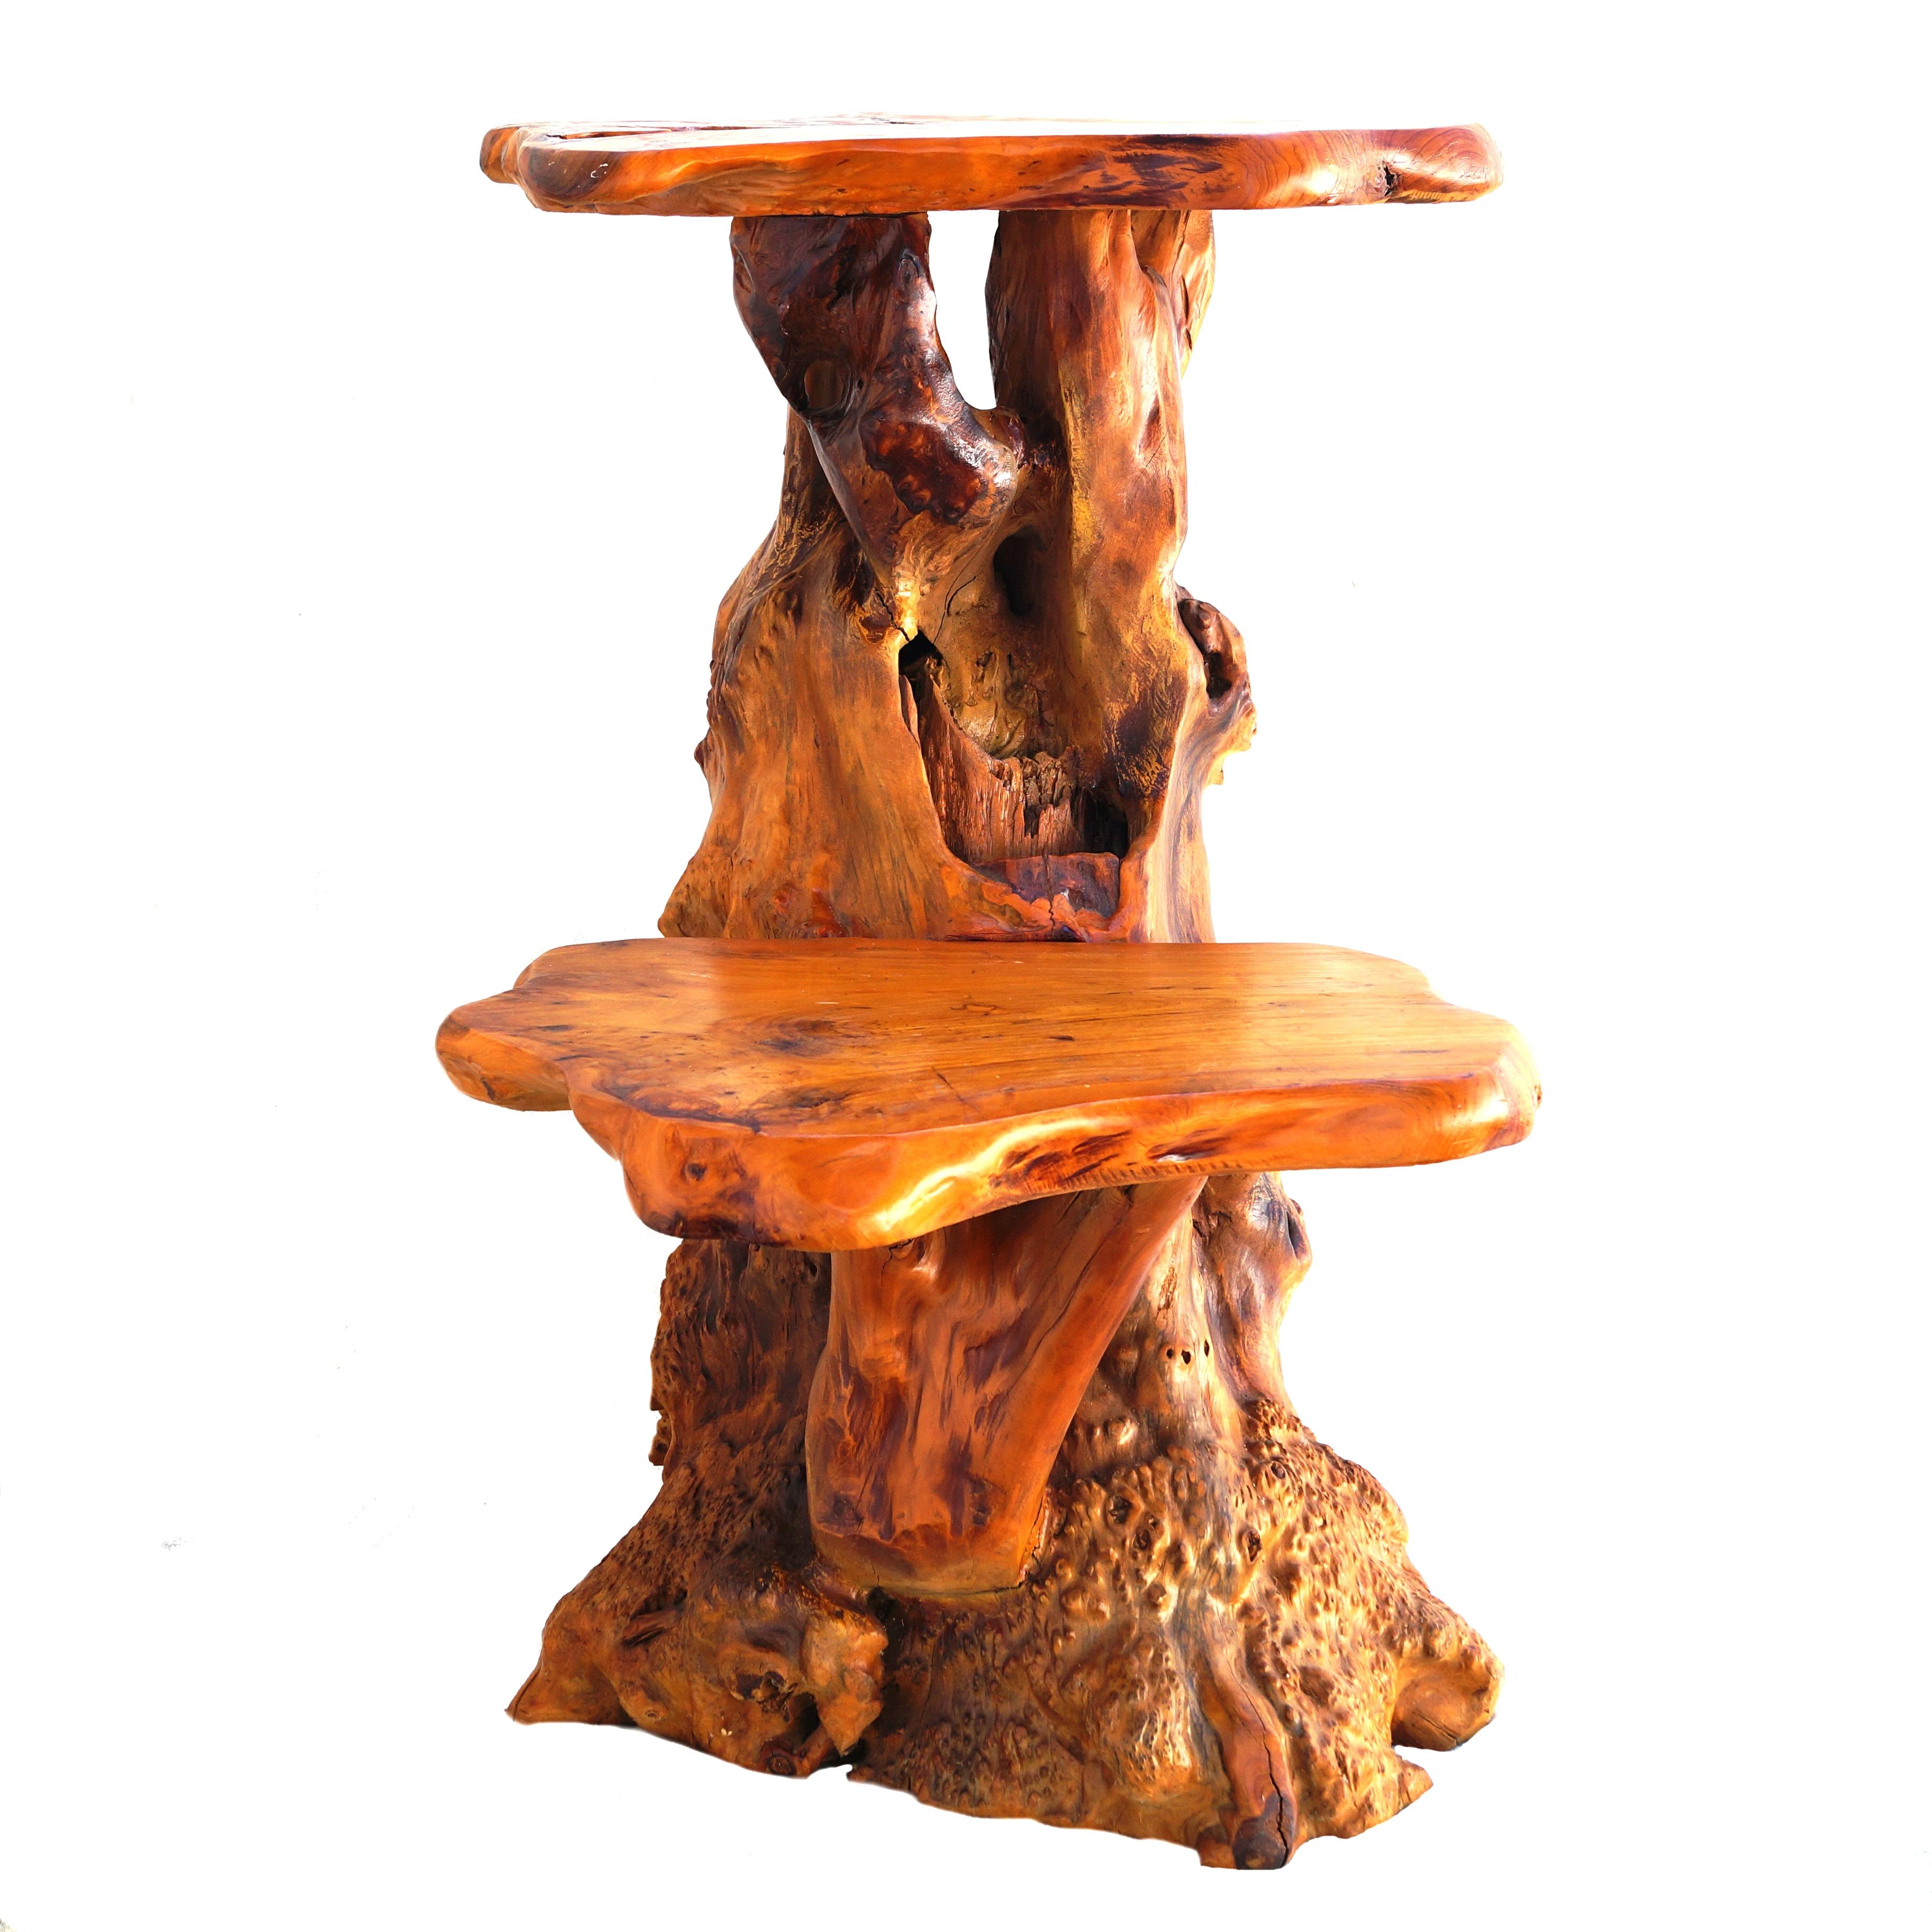 Large, heavy free form sculptural organic natural tree root wood pedestal, plant stand or tall side table. Two tier ( tiered ).
If you are in the New Jersey , New York City Metro Area , please contact us with your delivery zipcode, as we may be able